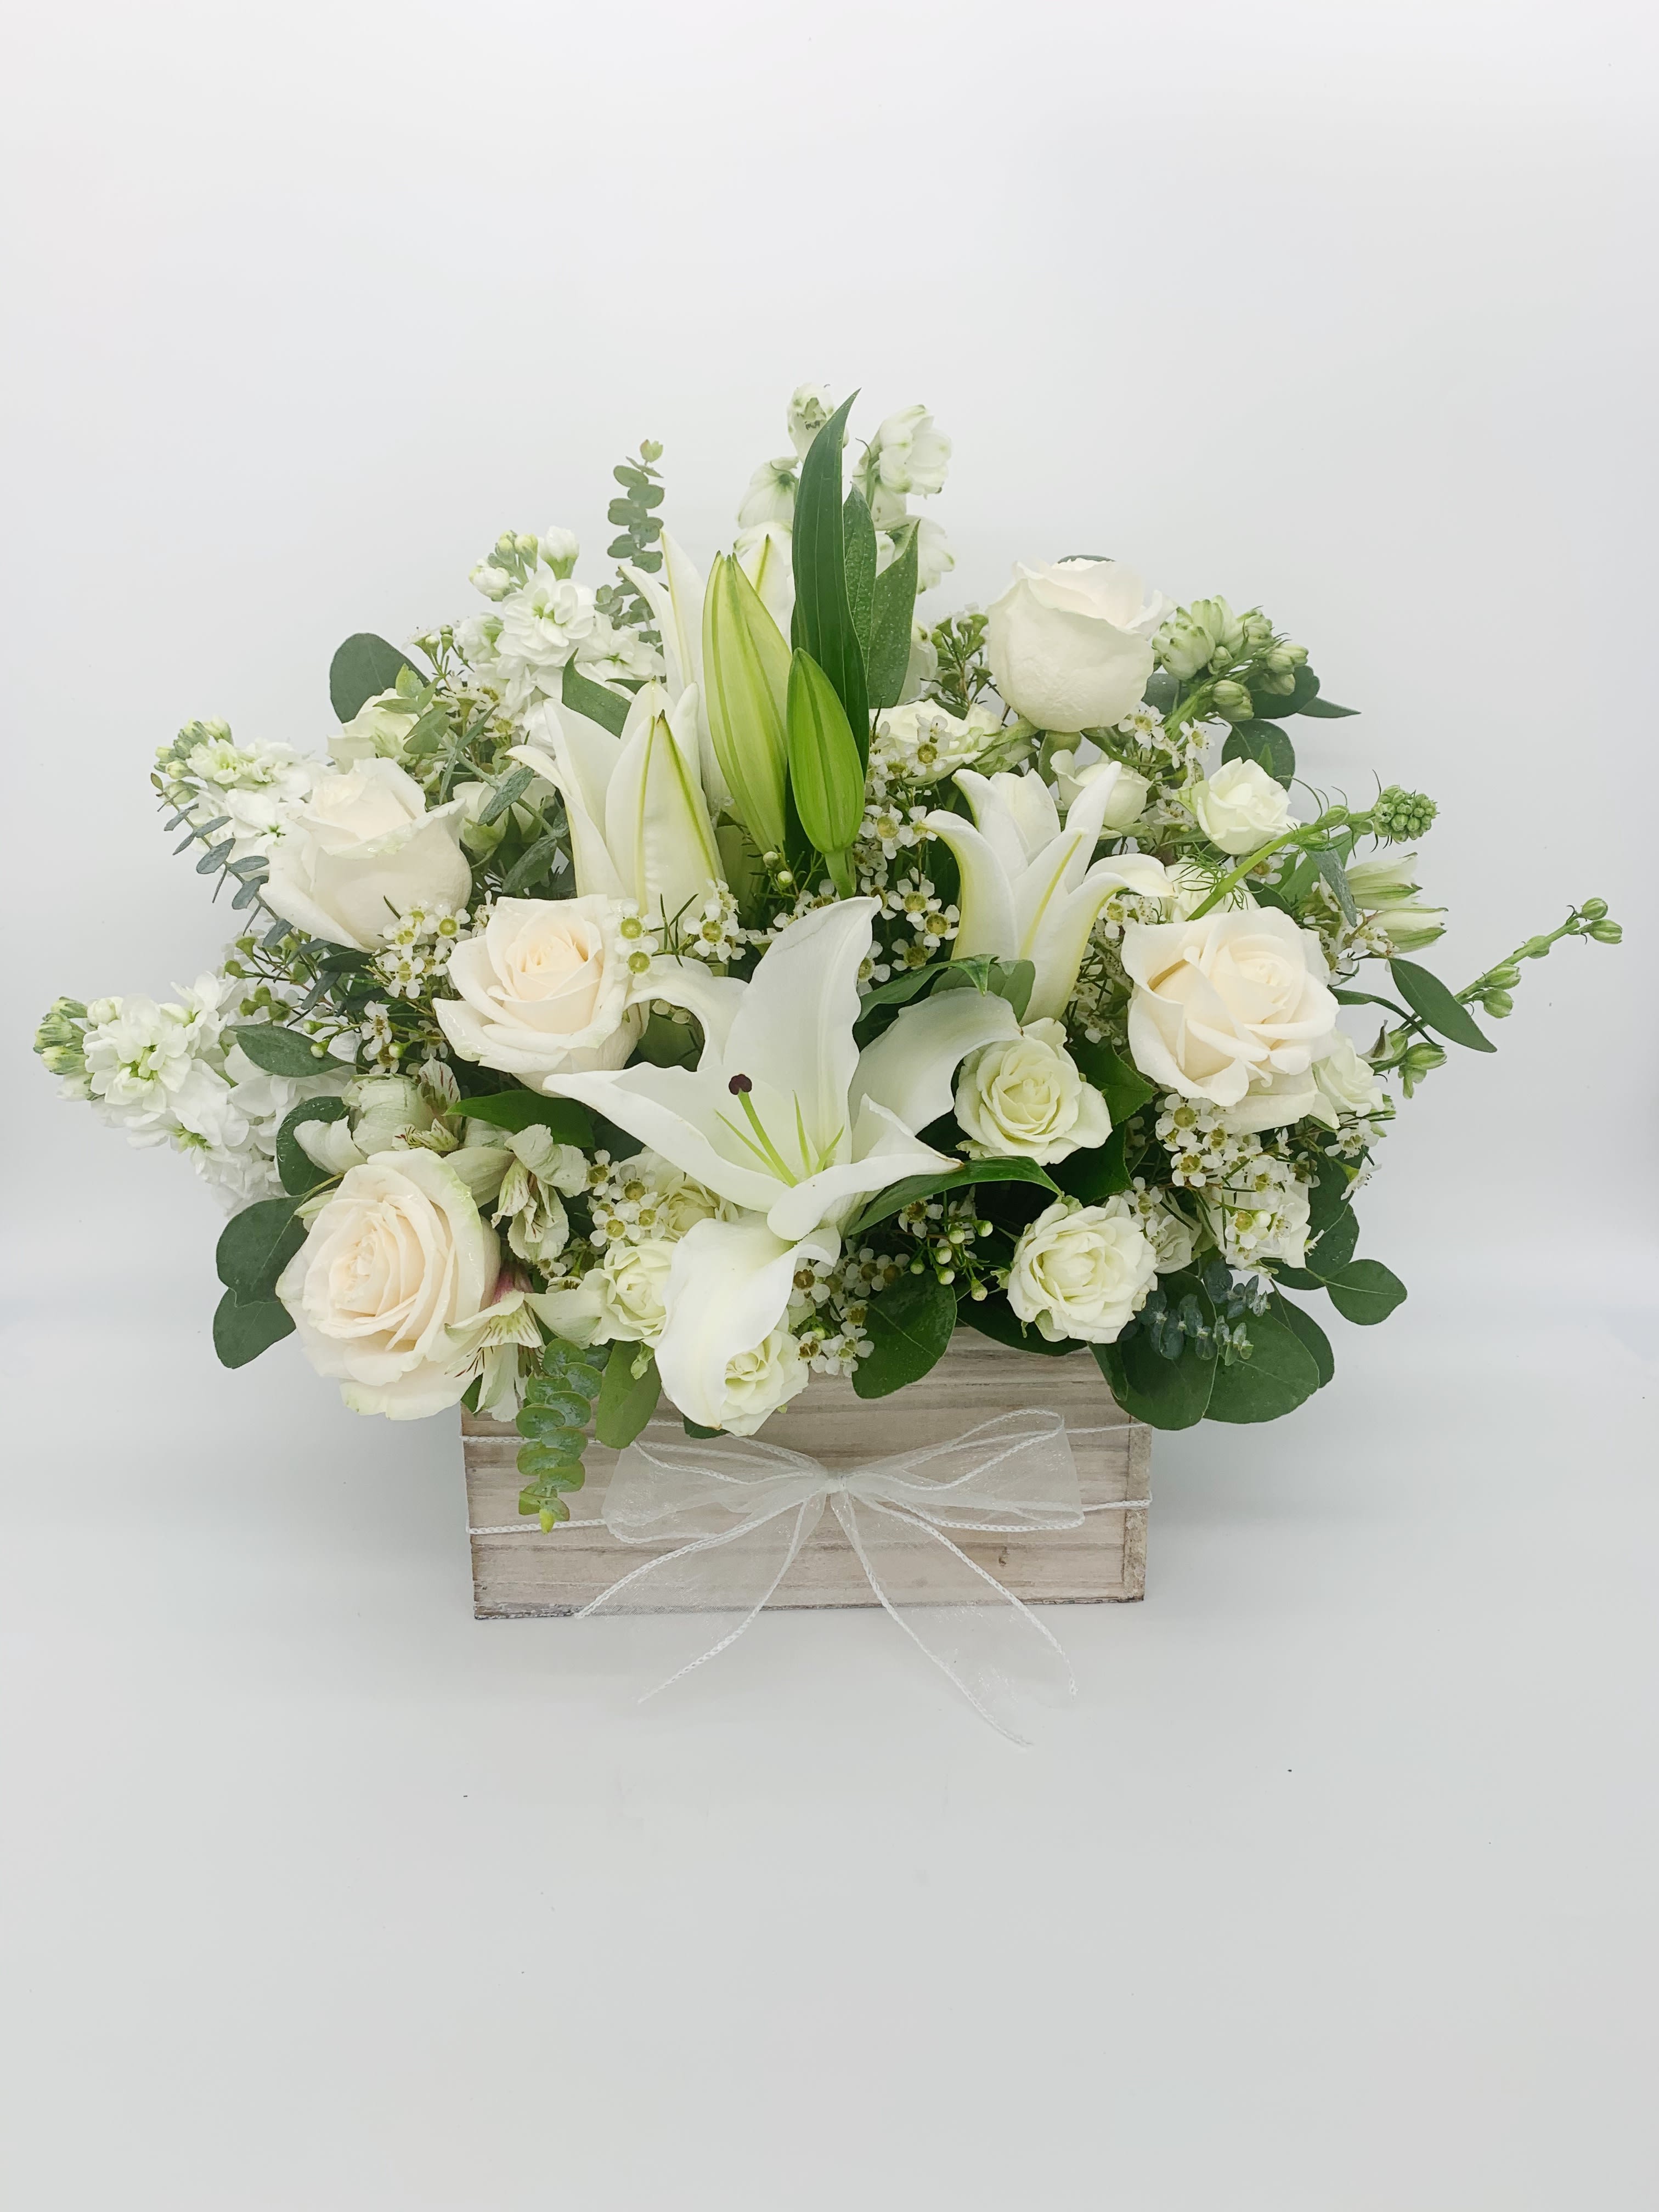 LF5 -Serenity - A beautiful garden-like floral arrangement to include a lovely assortment of all-white flowers including lilies, roses, stock, and spray roses.